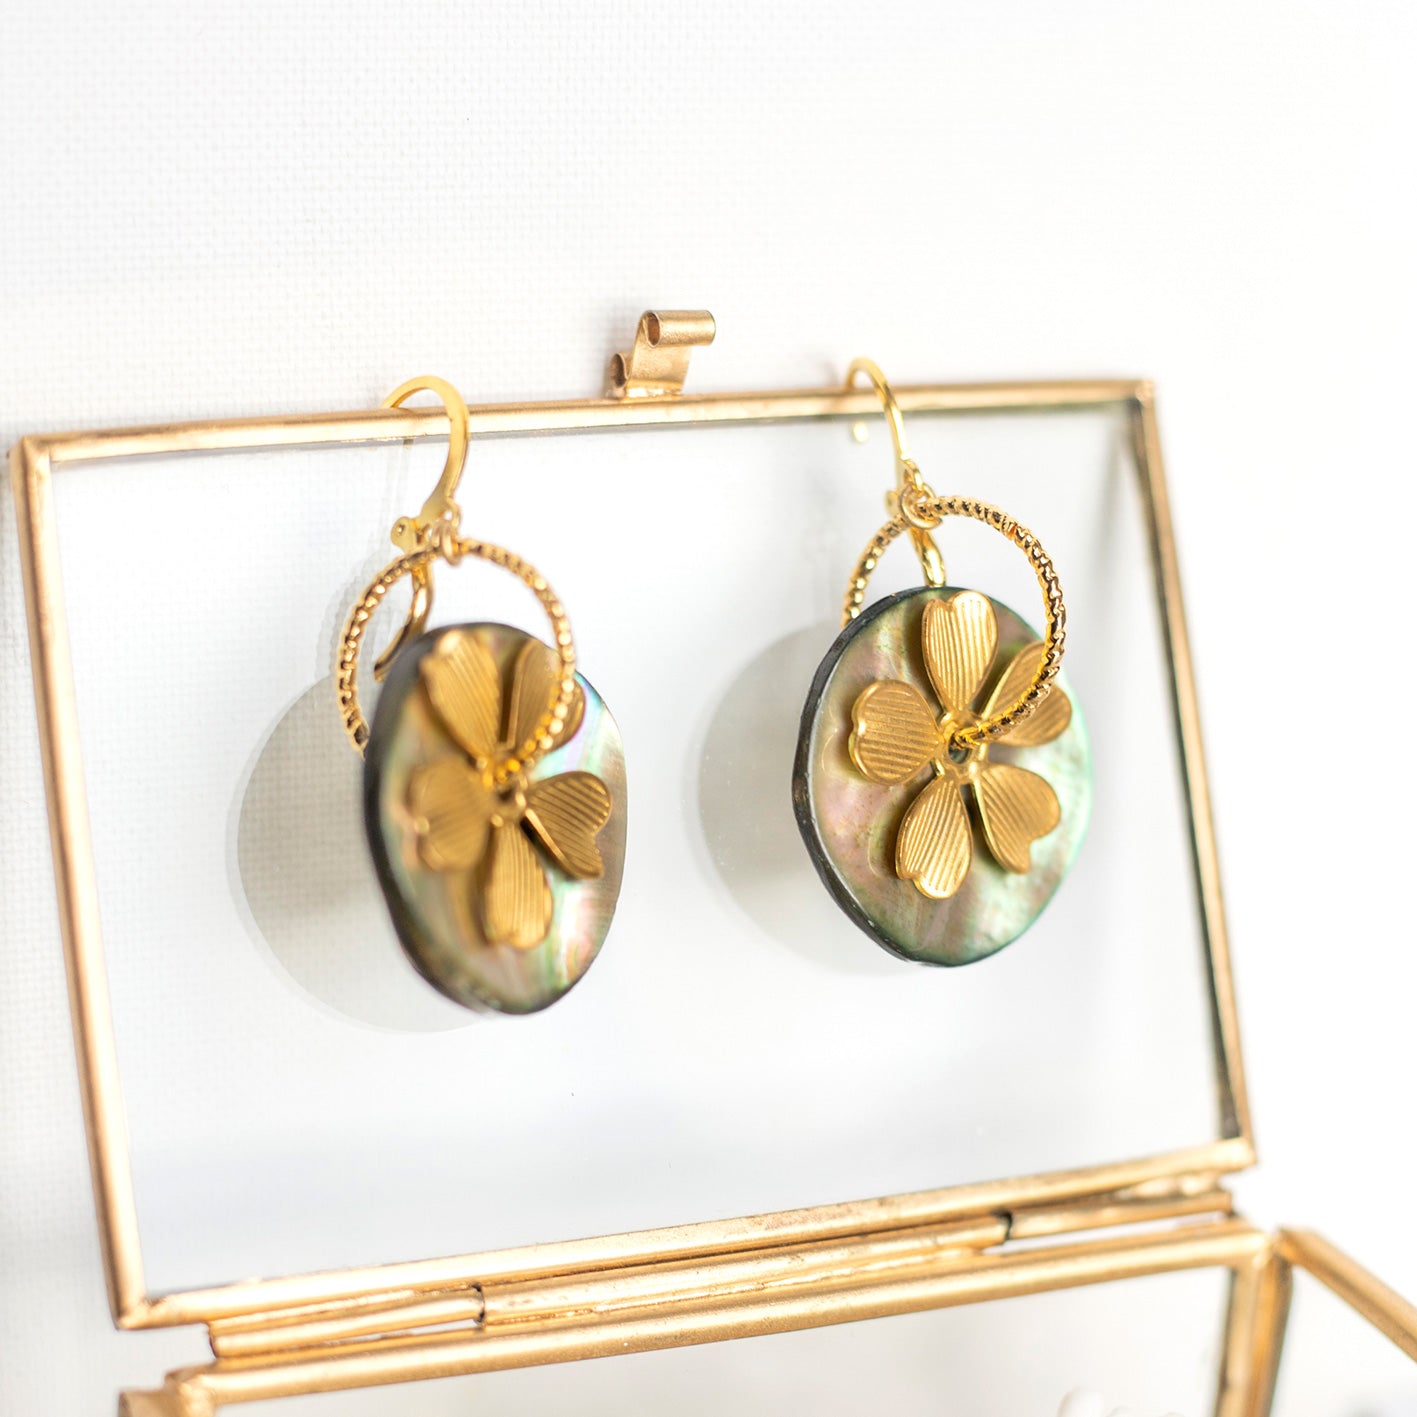 Earrings with bluish mother-of-pearl buttons and flowers in fine gold-plated brass